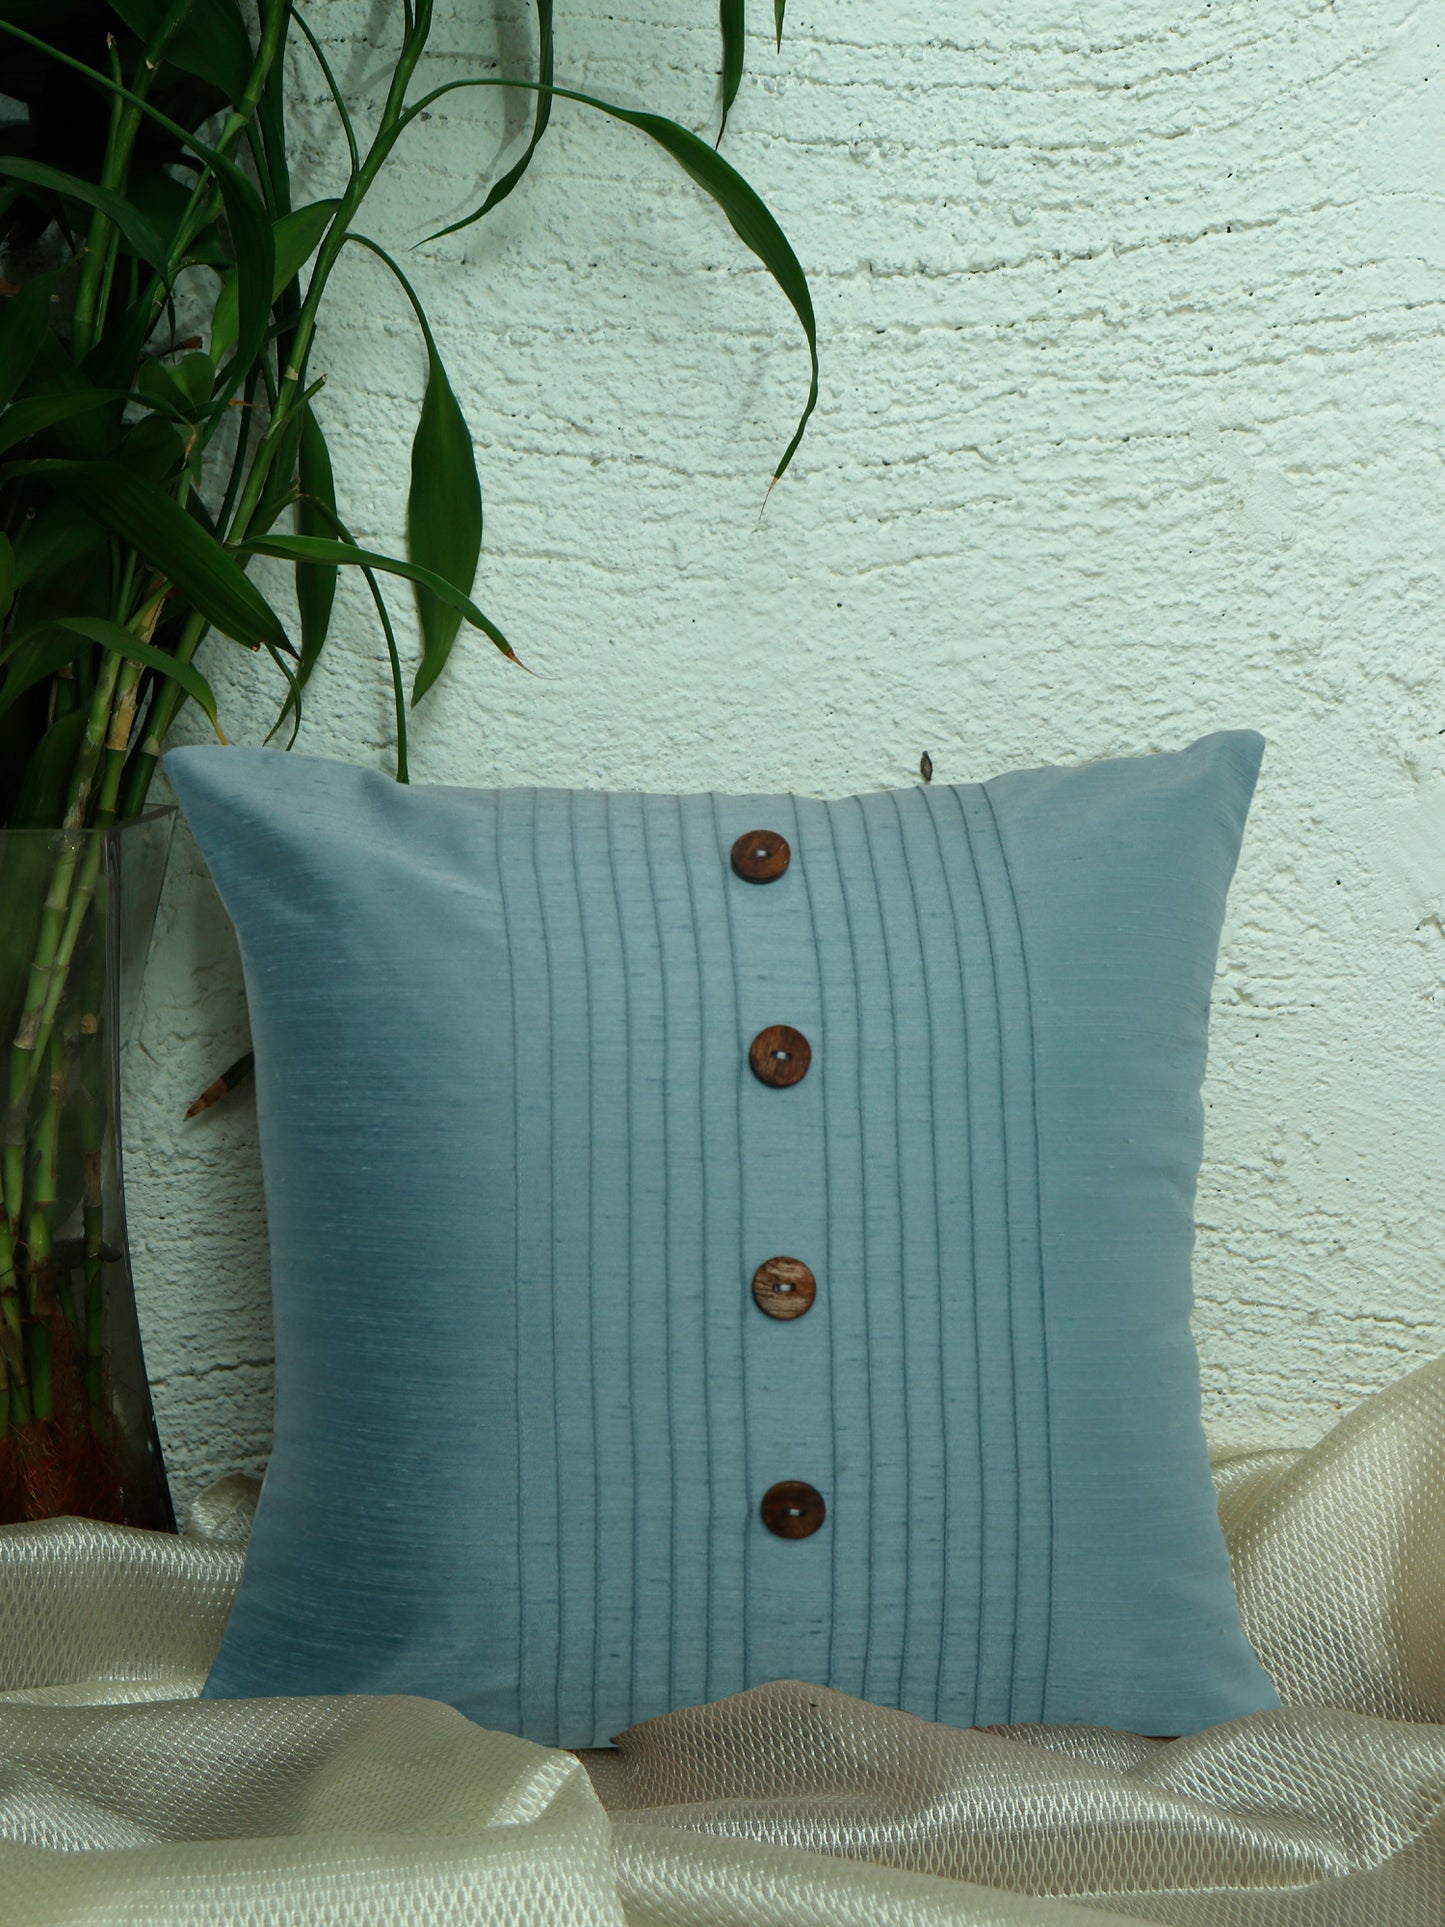 Technique Cushion Cover Polyester Pintuck with Buttons Aqua - 16" X 16"